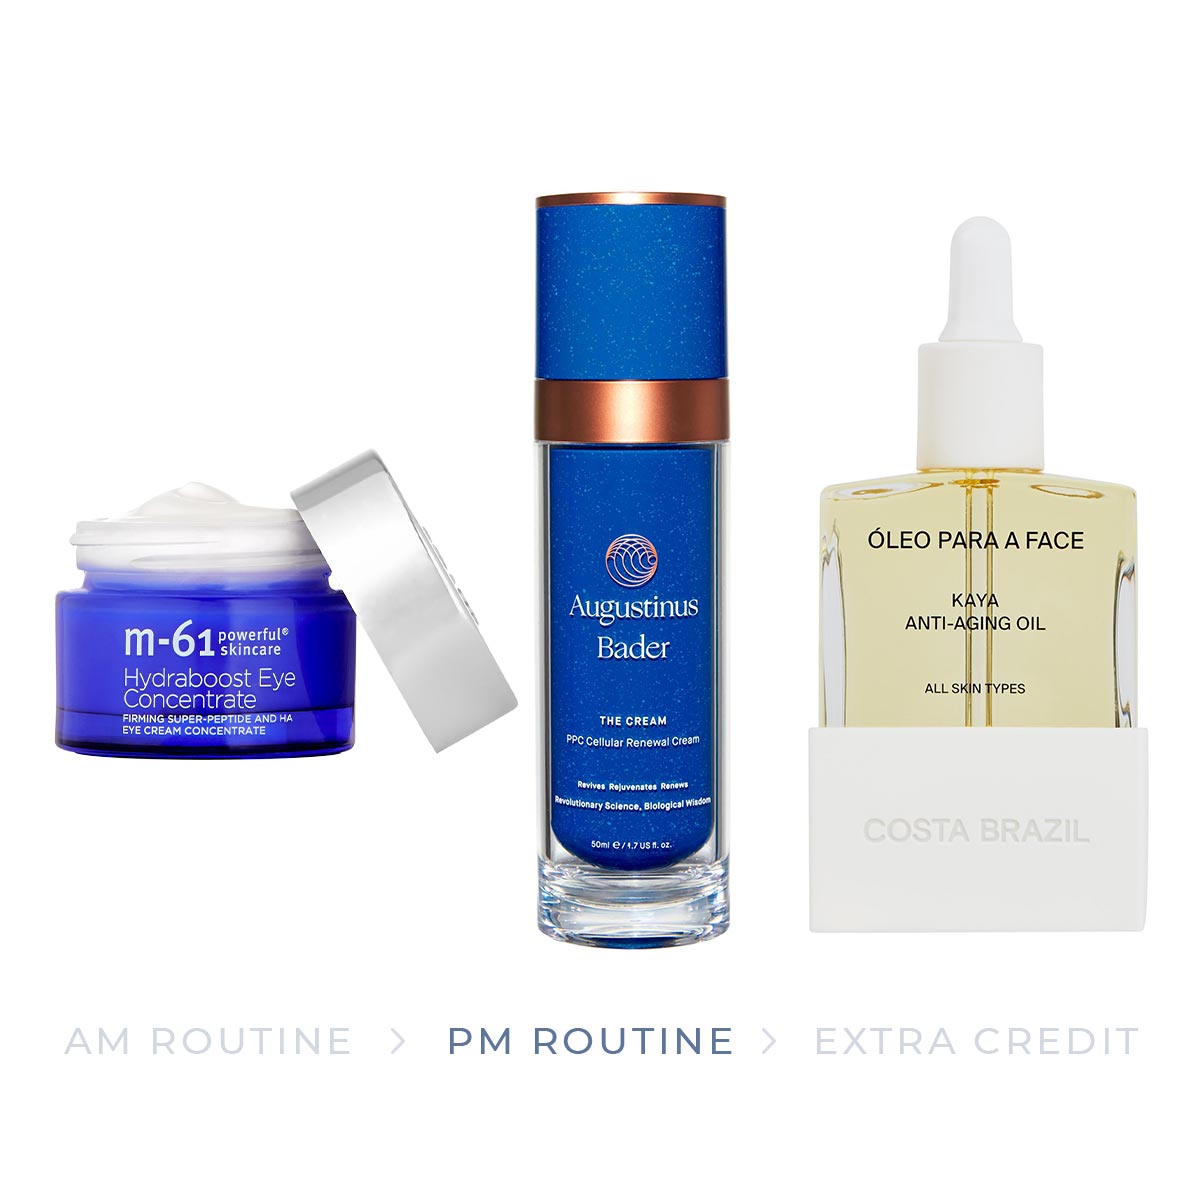 The products for the PM part of the dry skin skincare routine